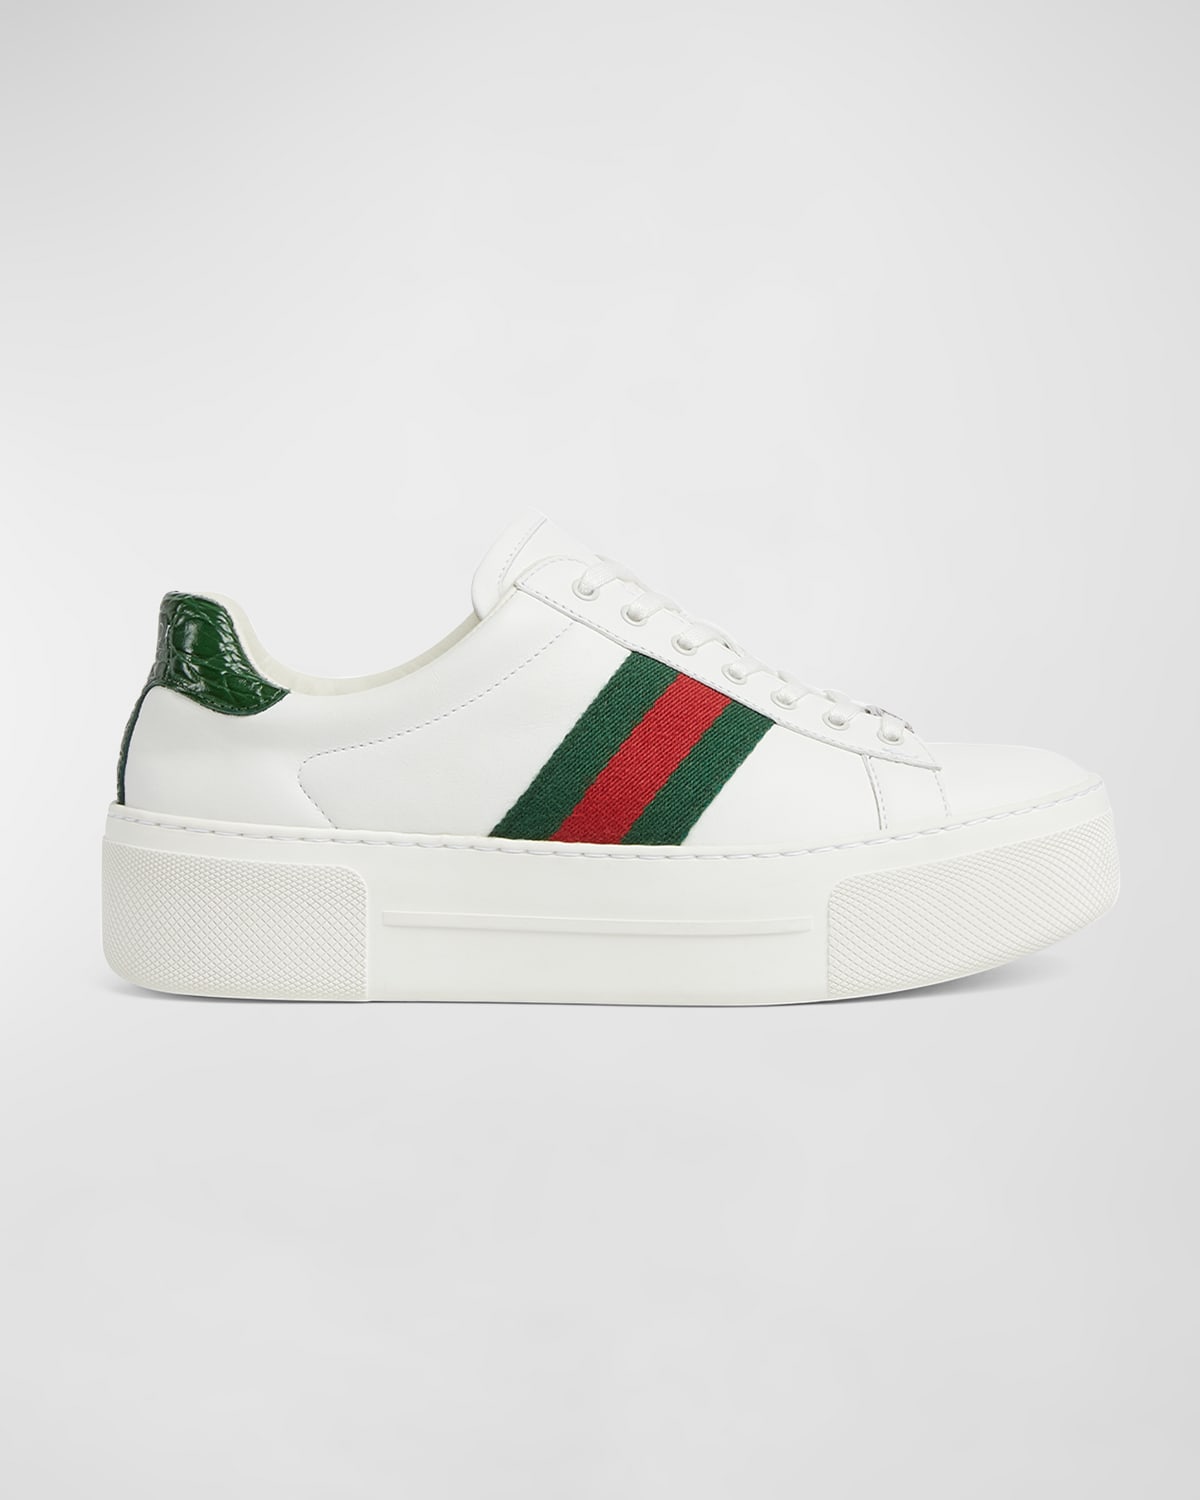 Gucci Ace Web Mixed Leather Sneakers In Black